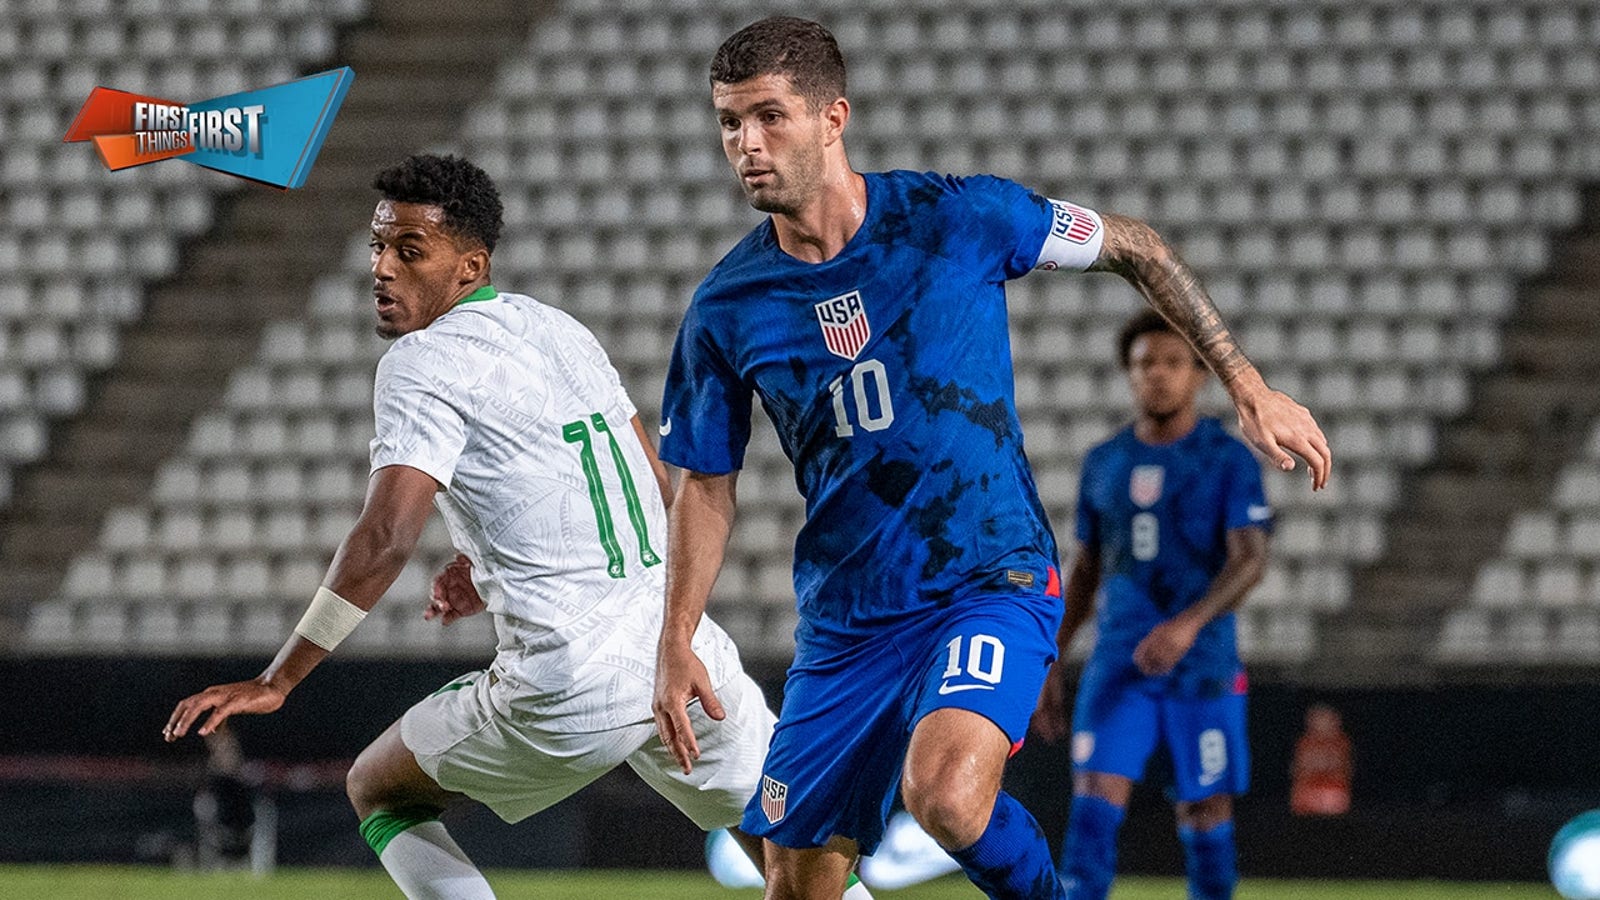 How important is Christian Pulisic to the USA team in the 2022 FIFA World Cup?